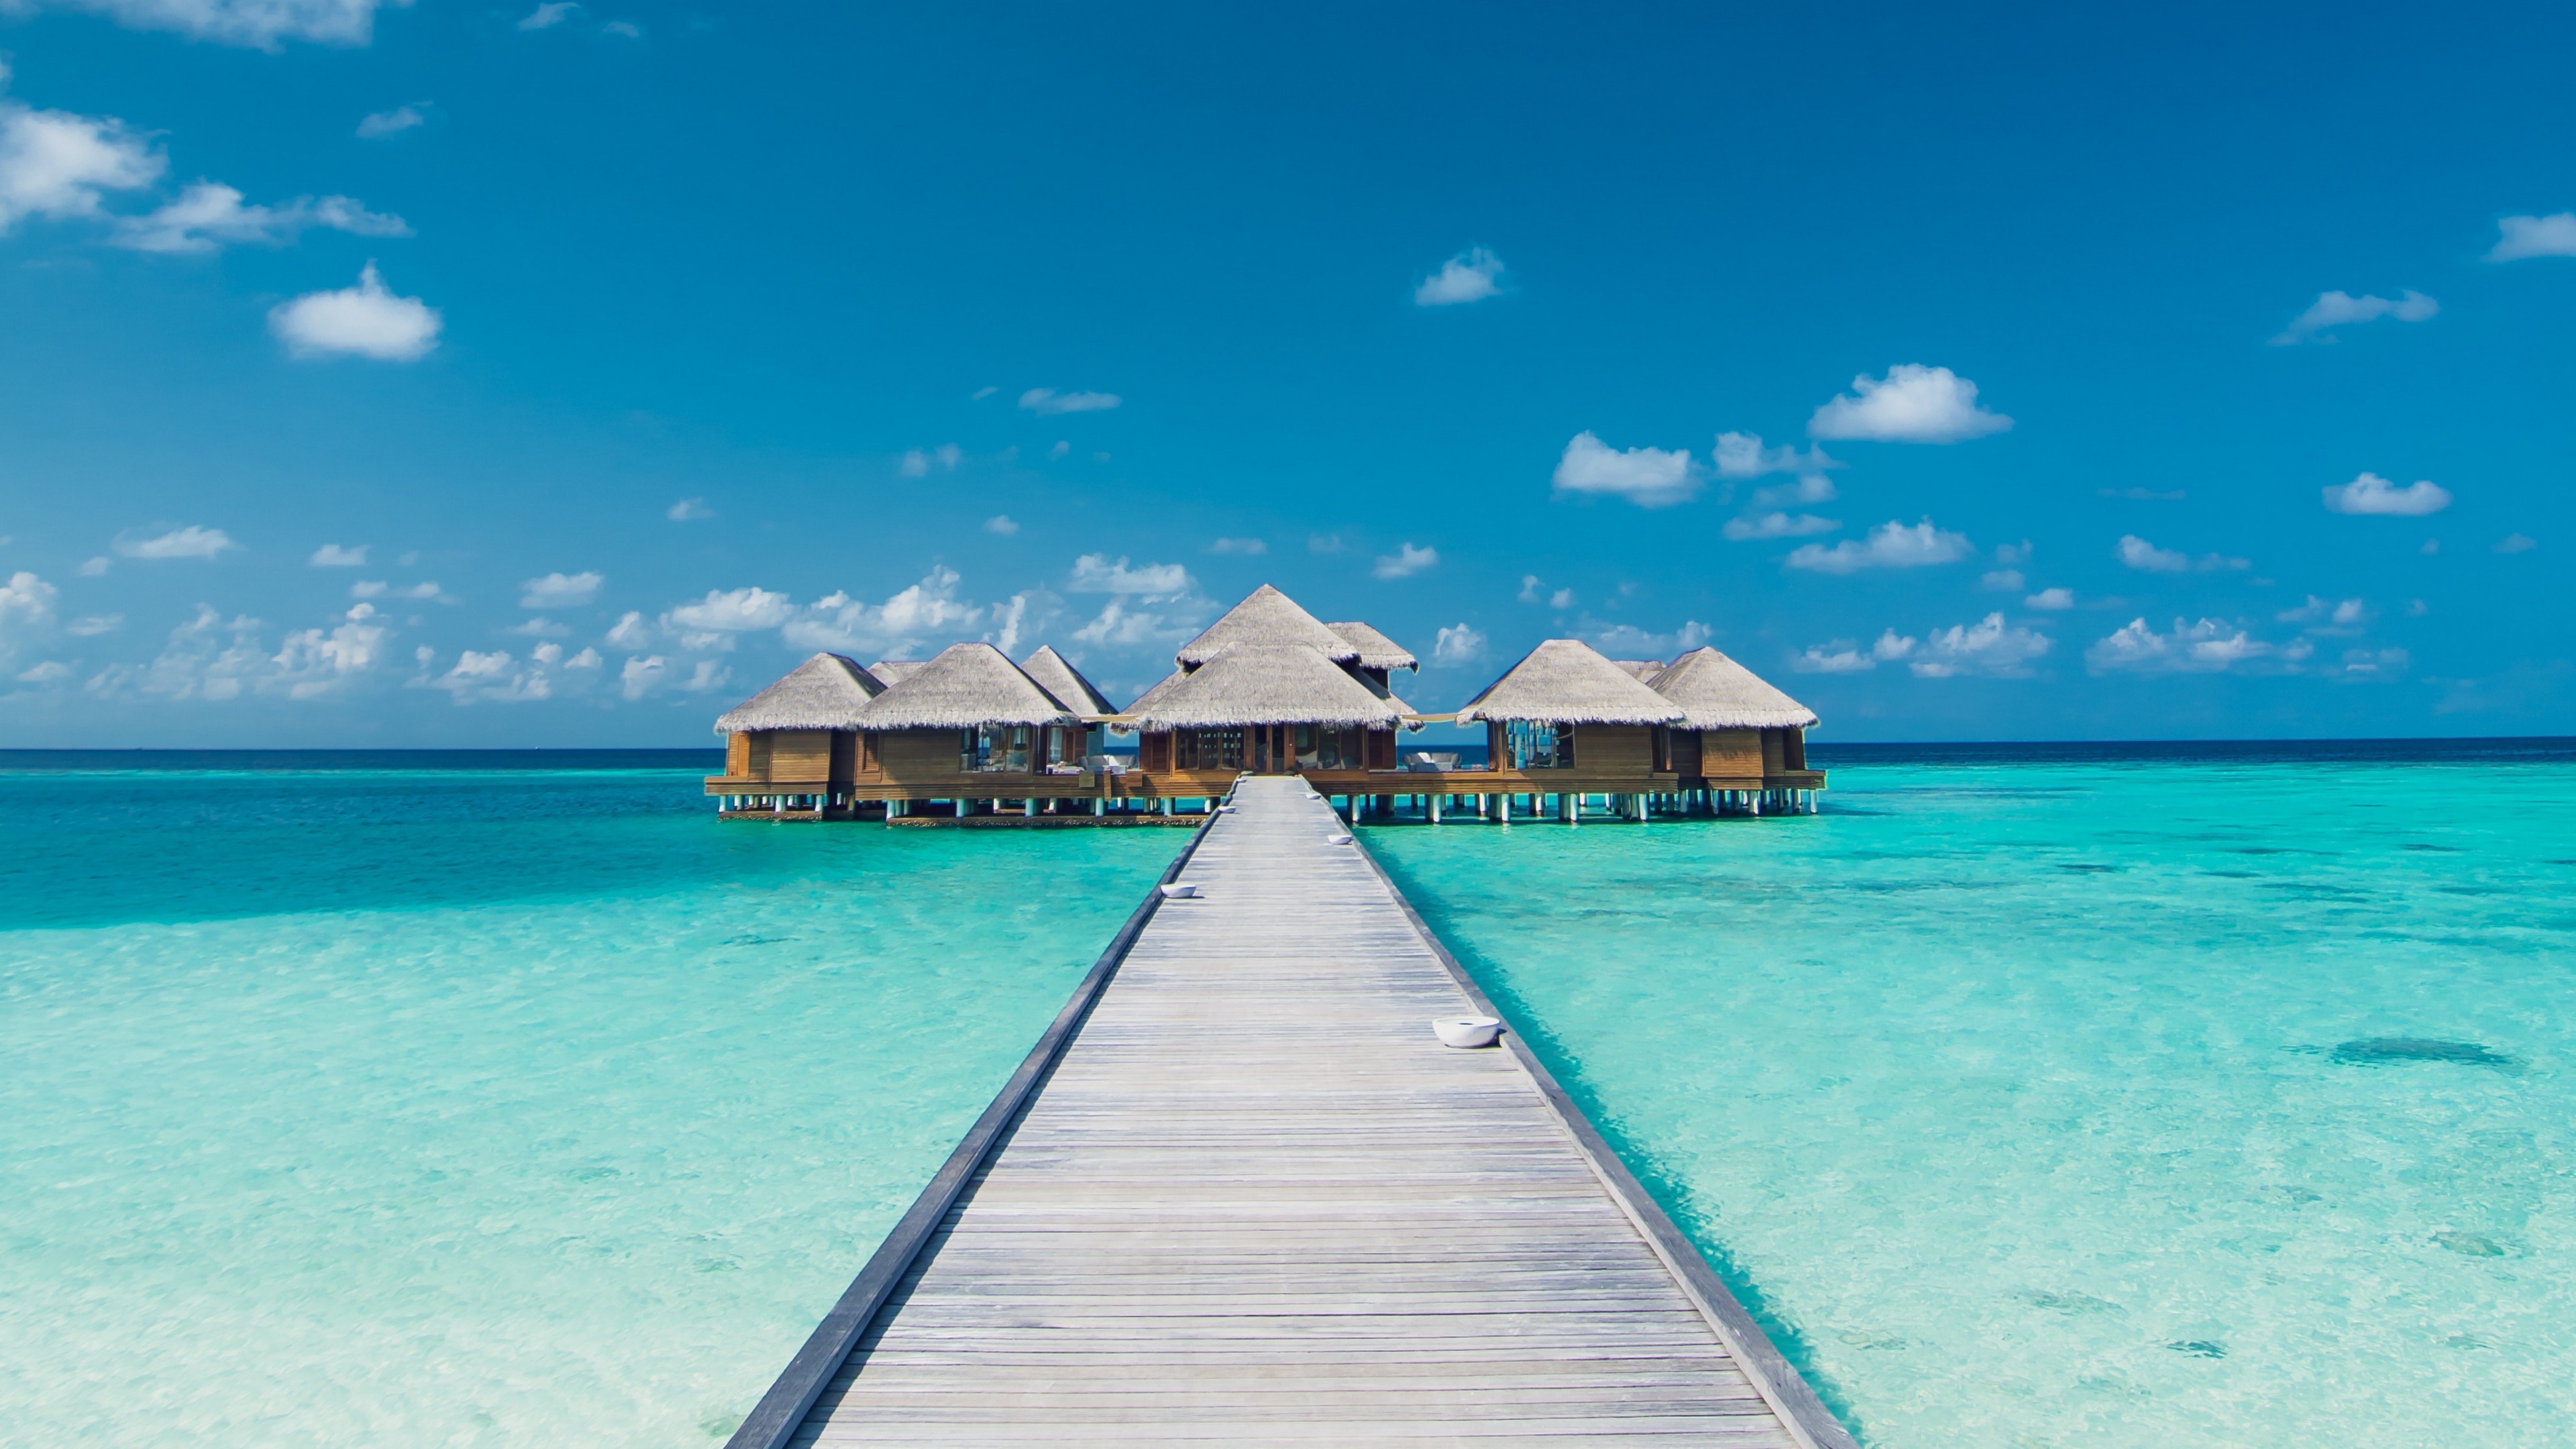 Pier On A Small Island With A Tropical View Background, Maldives Pictures  Background Image And Wallpaper for Free Download